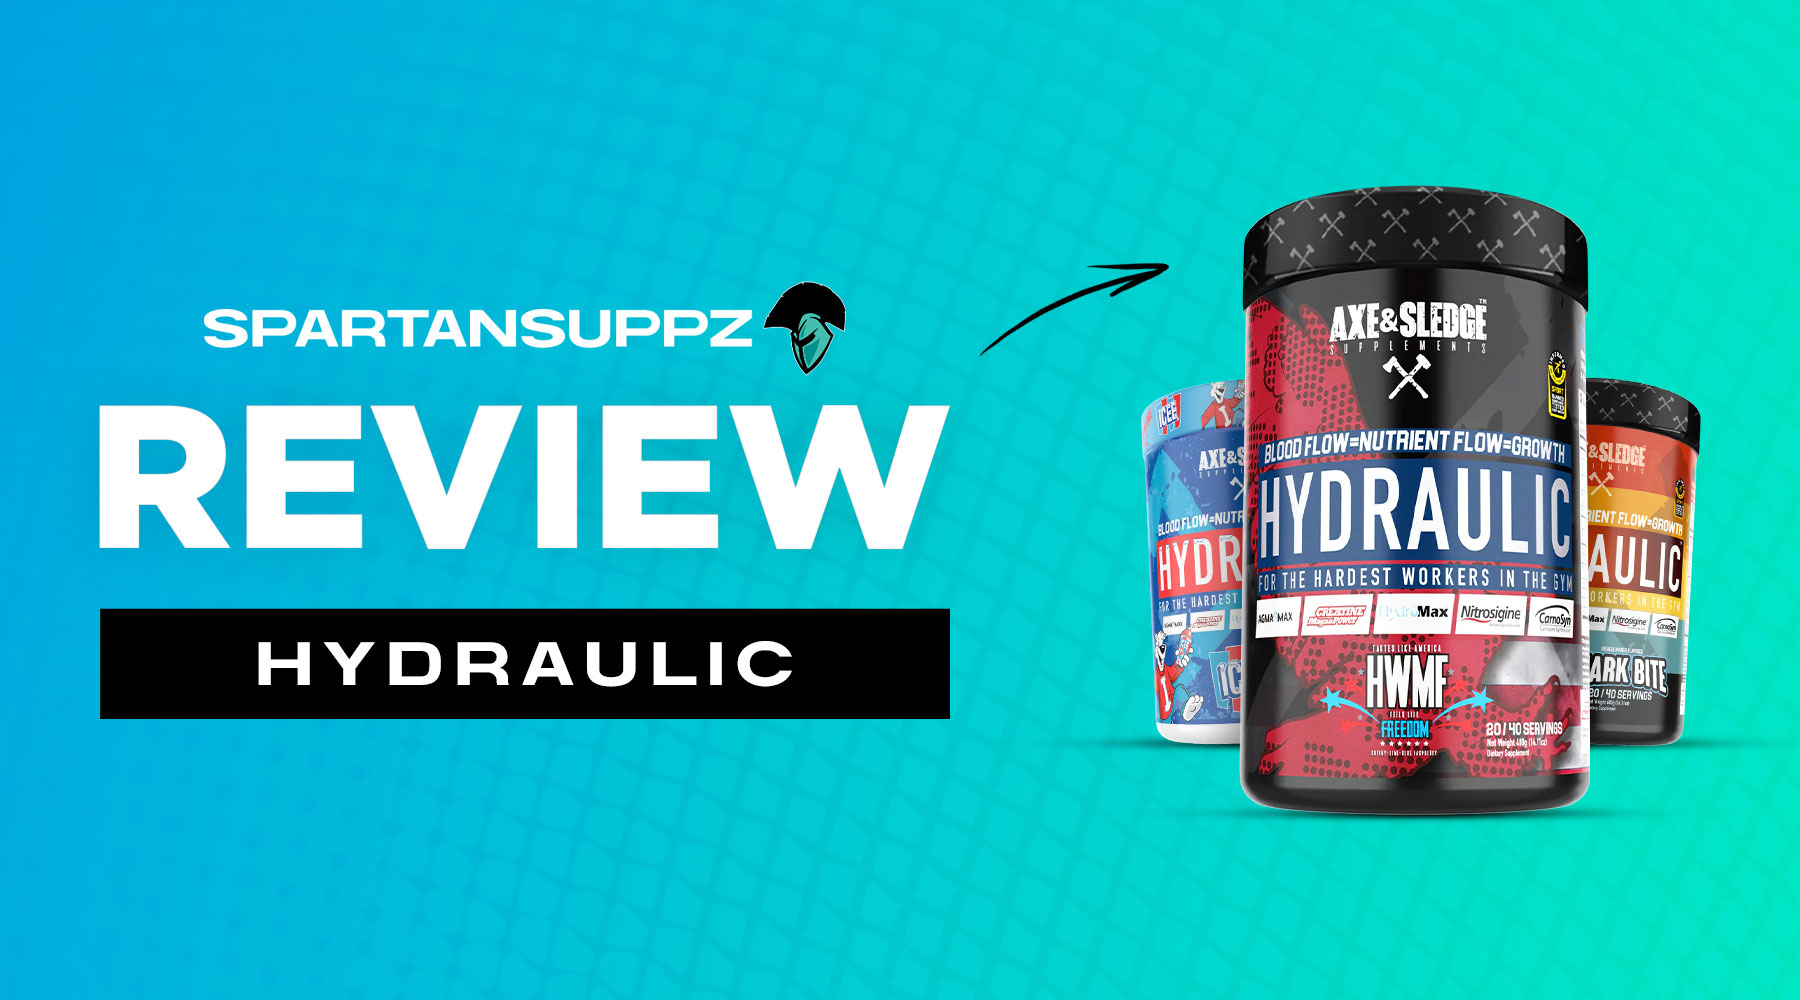 Axe & Sledge Hydraulic Pre Workout Review